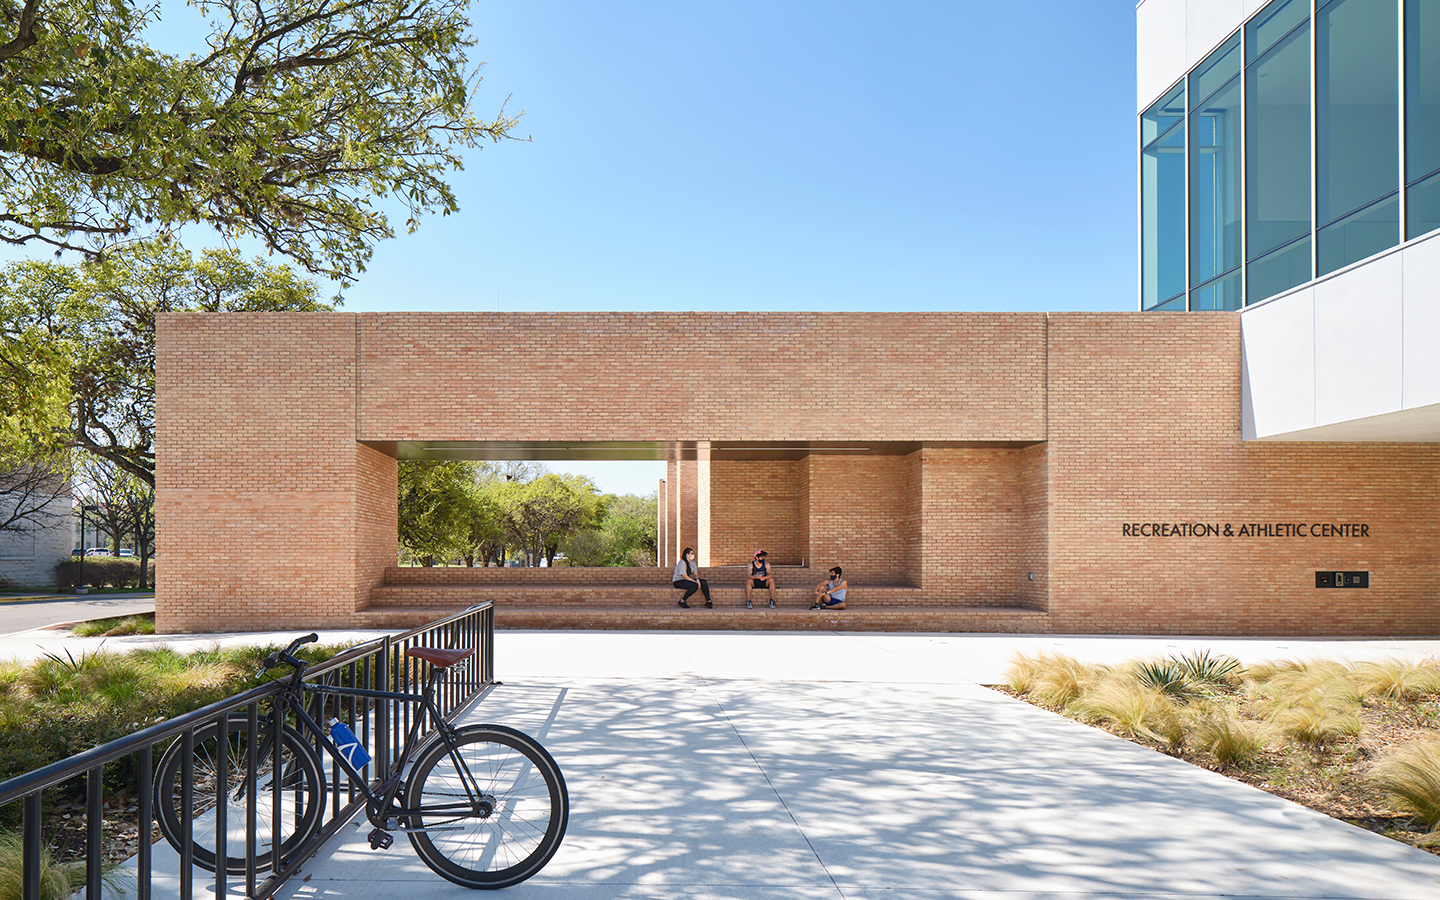 Brick extension of Recreation and Athletic Center by Specht Novak Architects, showcasing the multi-level covered outdoor pavilion. Shot by Andrea Calo.